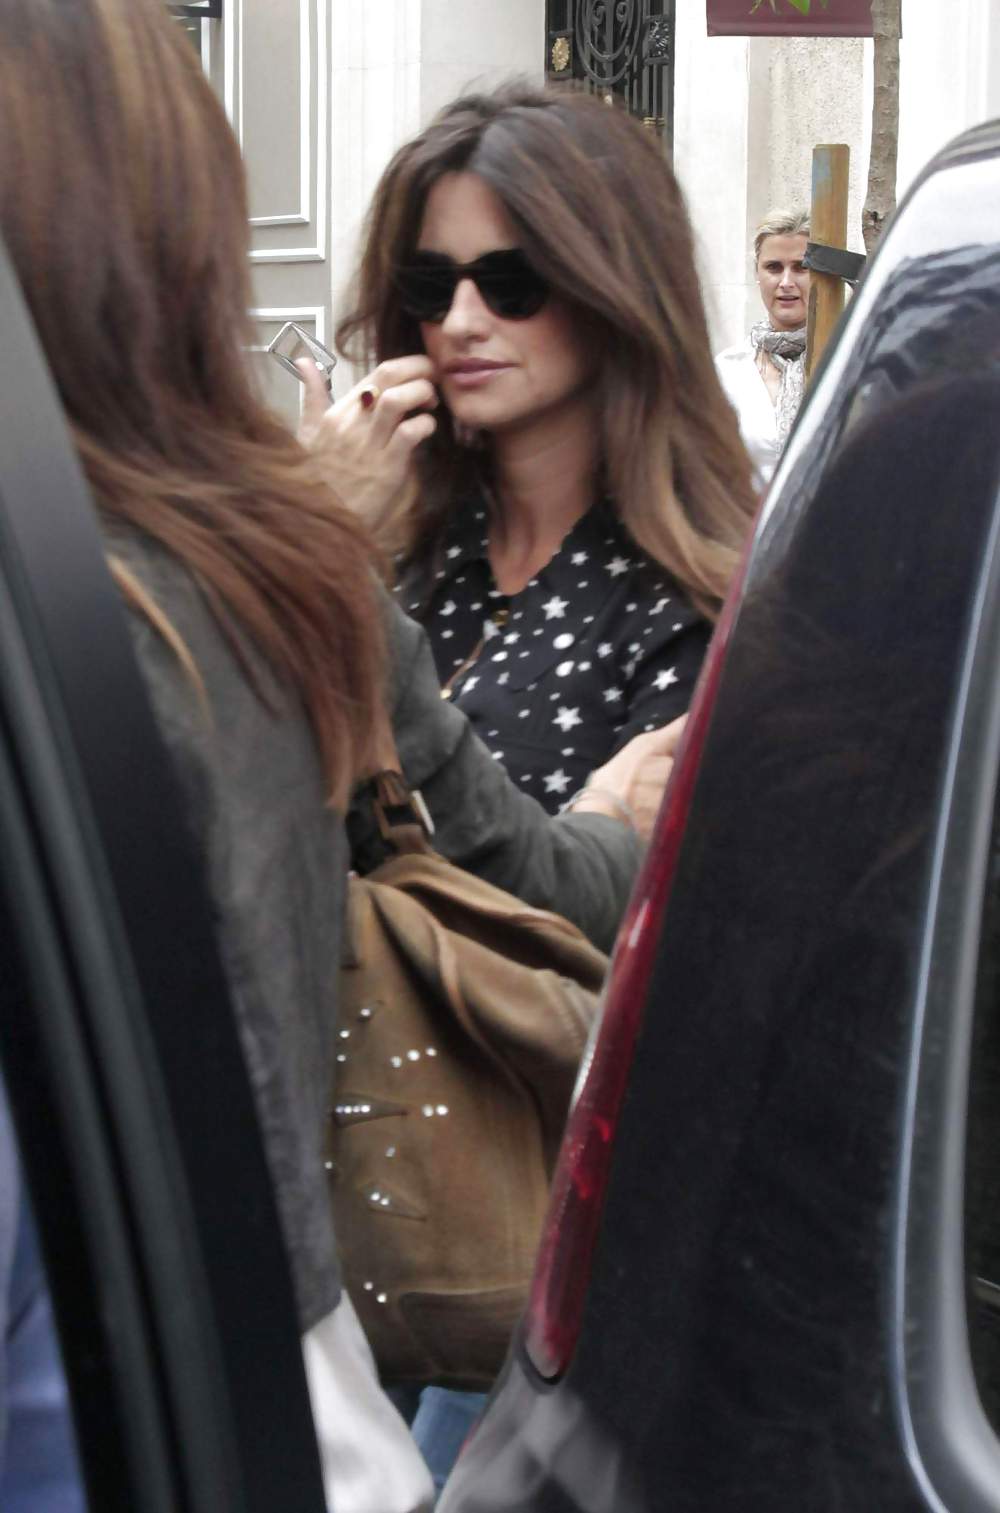 Penelope Cruz shopping with a friend in Madrid #3994436